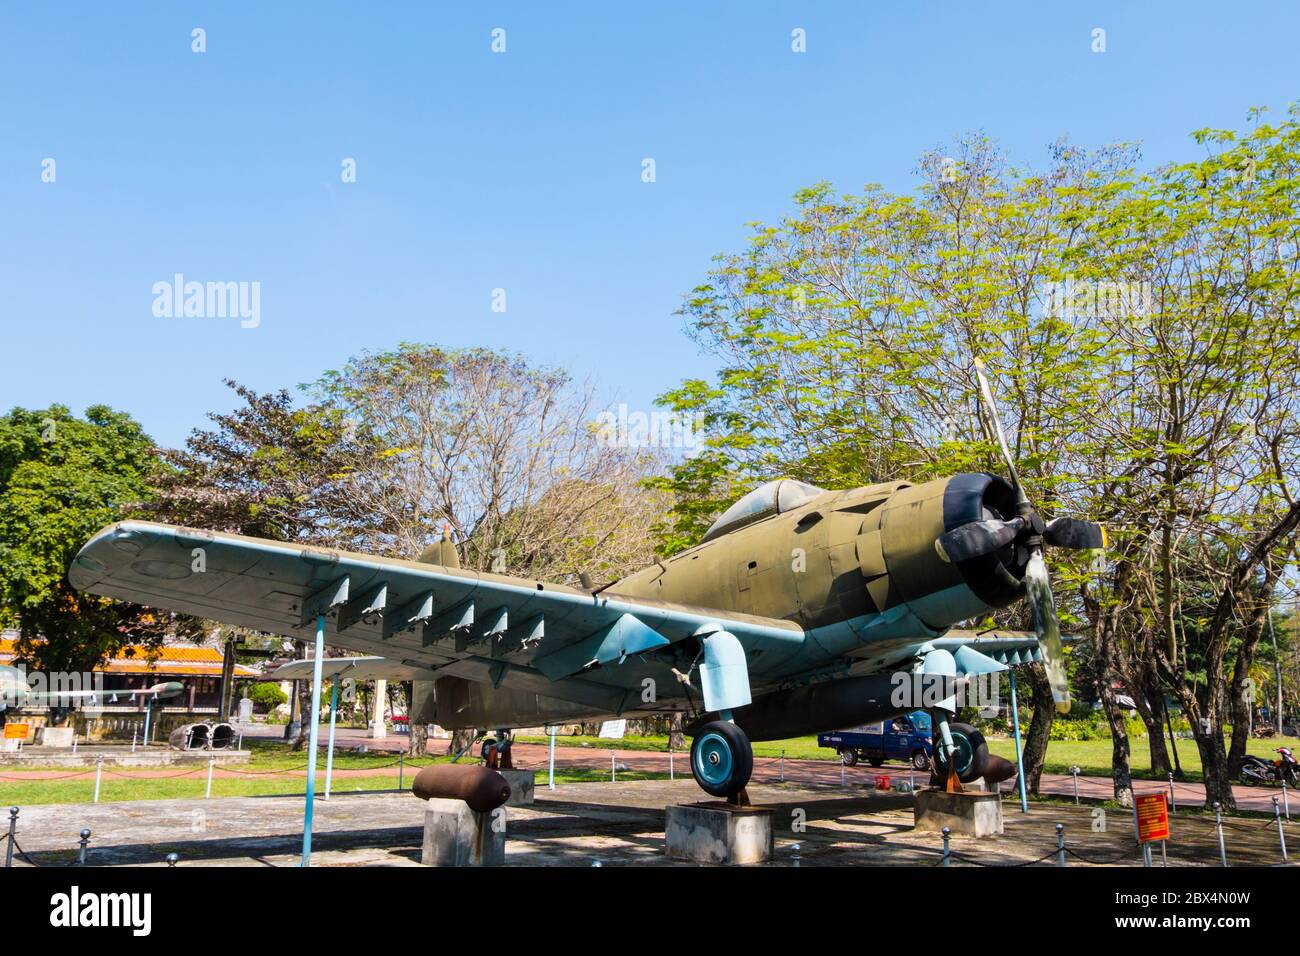 AD-6 aircraft plane, used by US army in the Vietnam war, seized in 1975, Thua Thien Hue History Museum, Hue War Museum, Hue, Vietnam Stock Photo